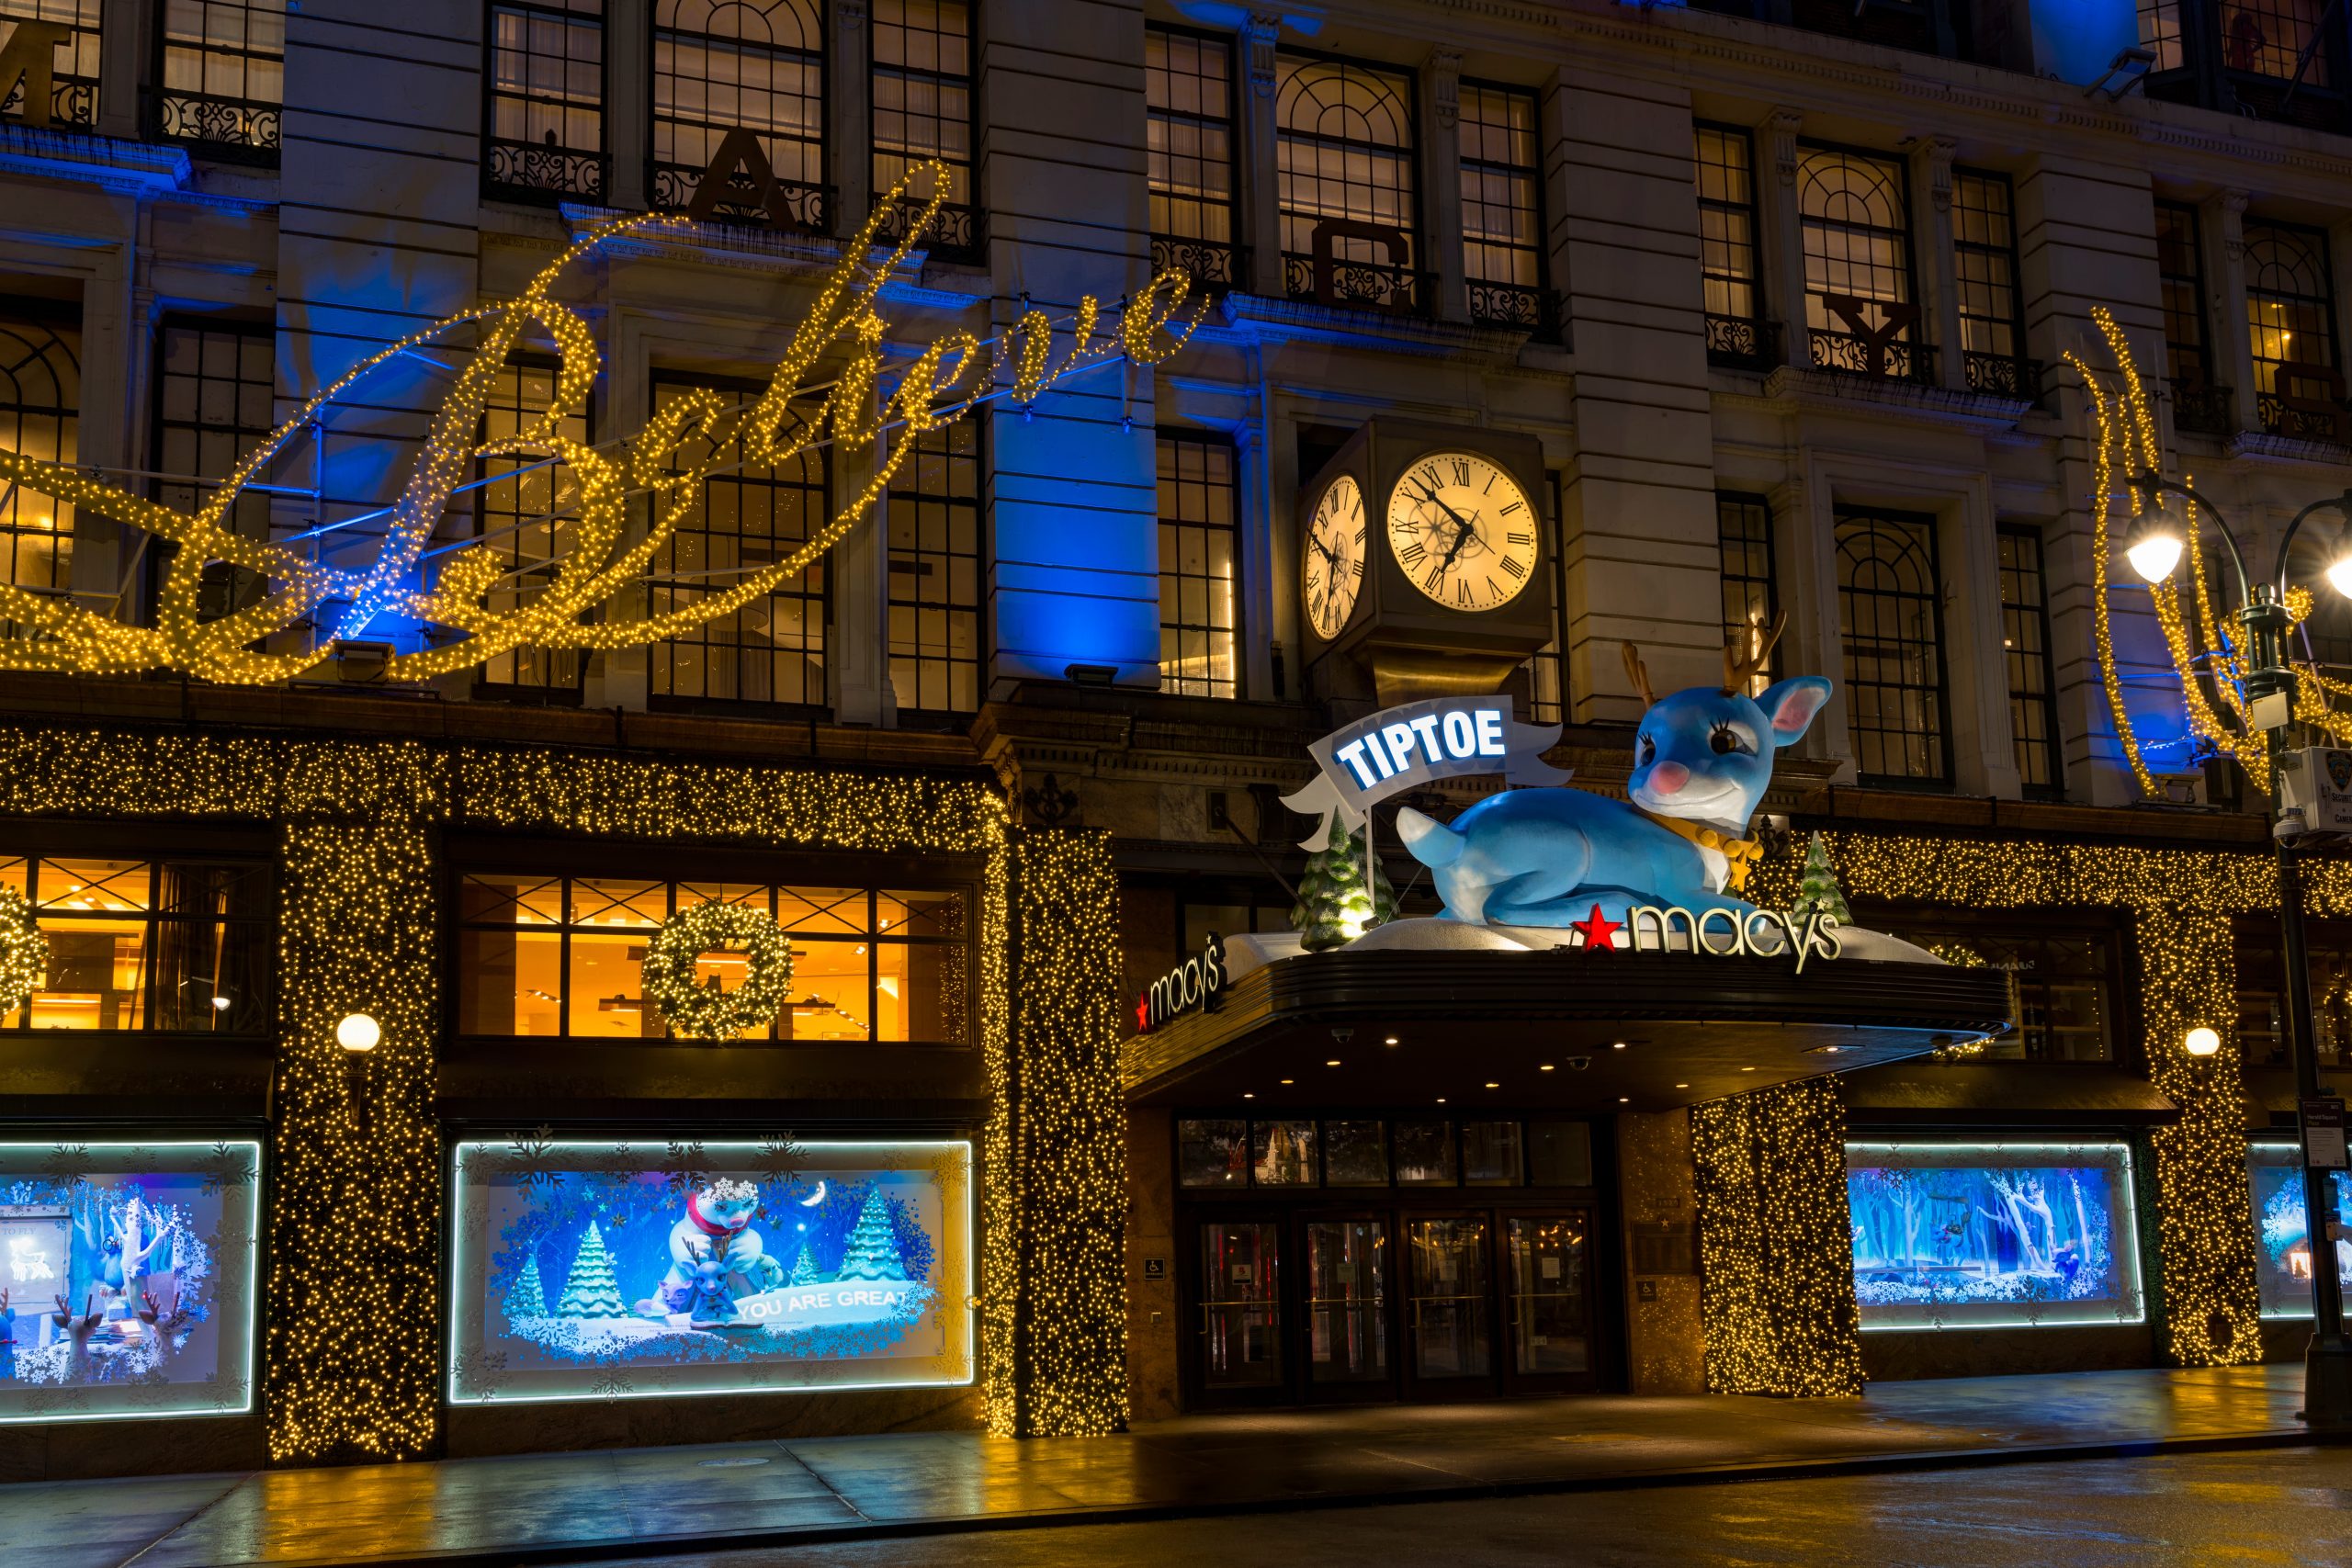 17 Retail Design Pros Share First Memories of Holiday Windows